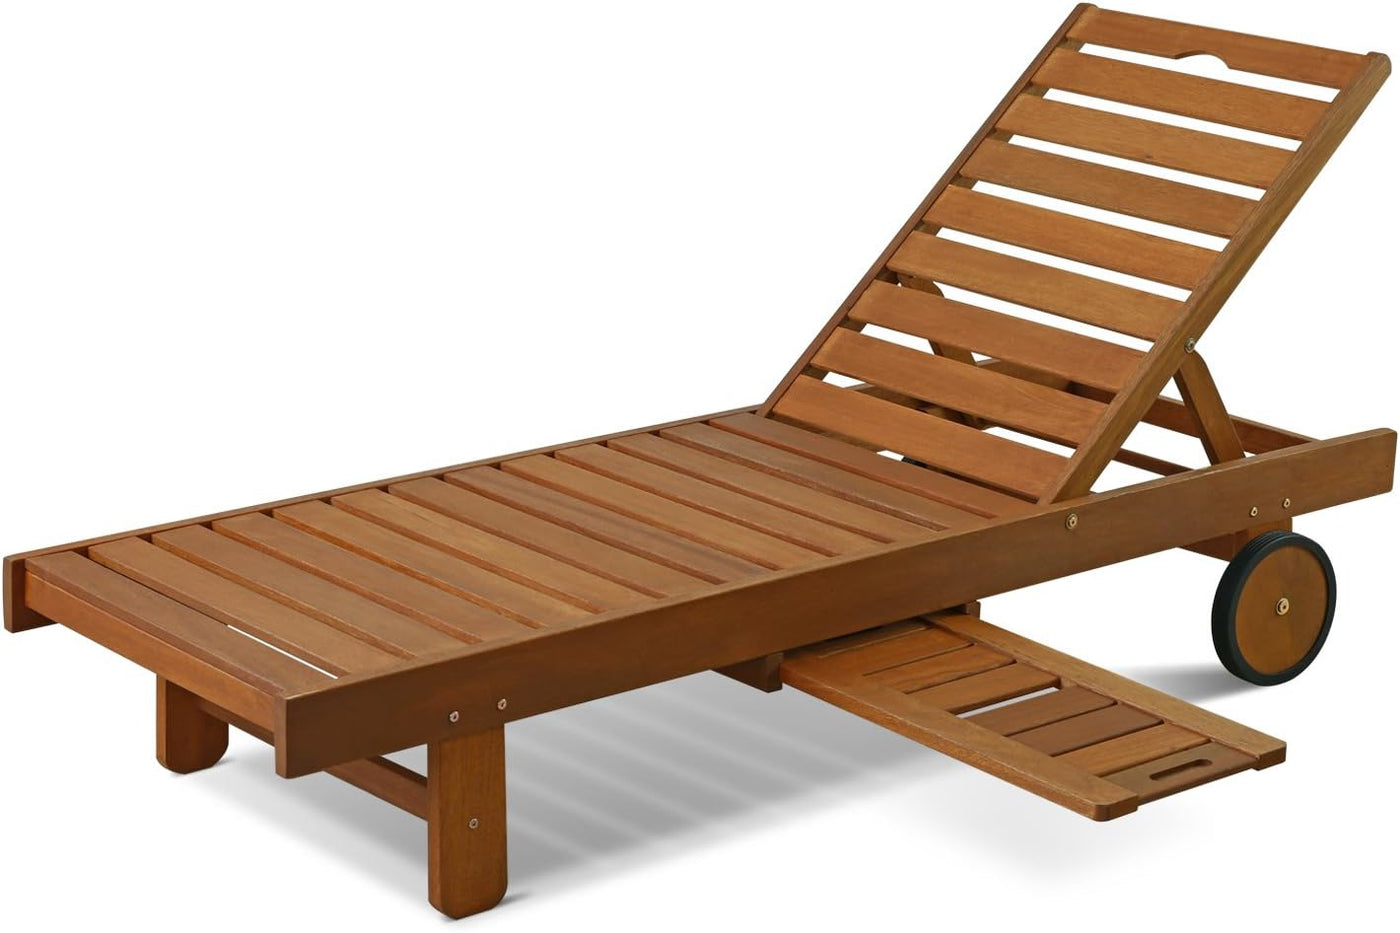 Outdoor Hardwood Patio Furniture Sun Lounger with Tray in Teak Oil, Natural - $110